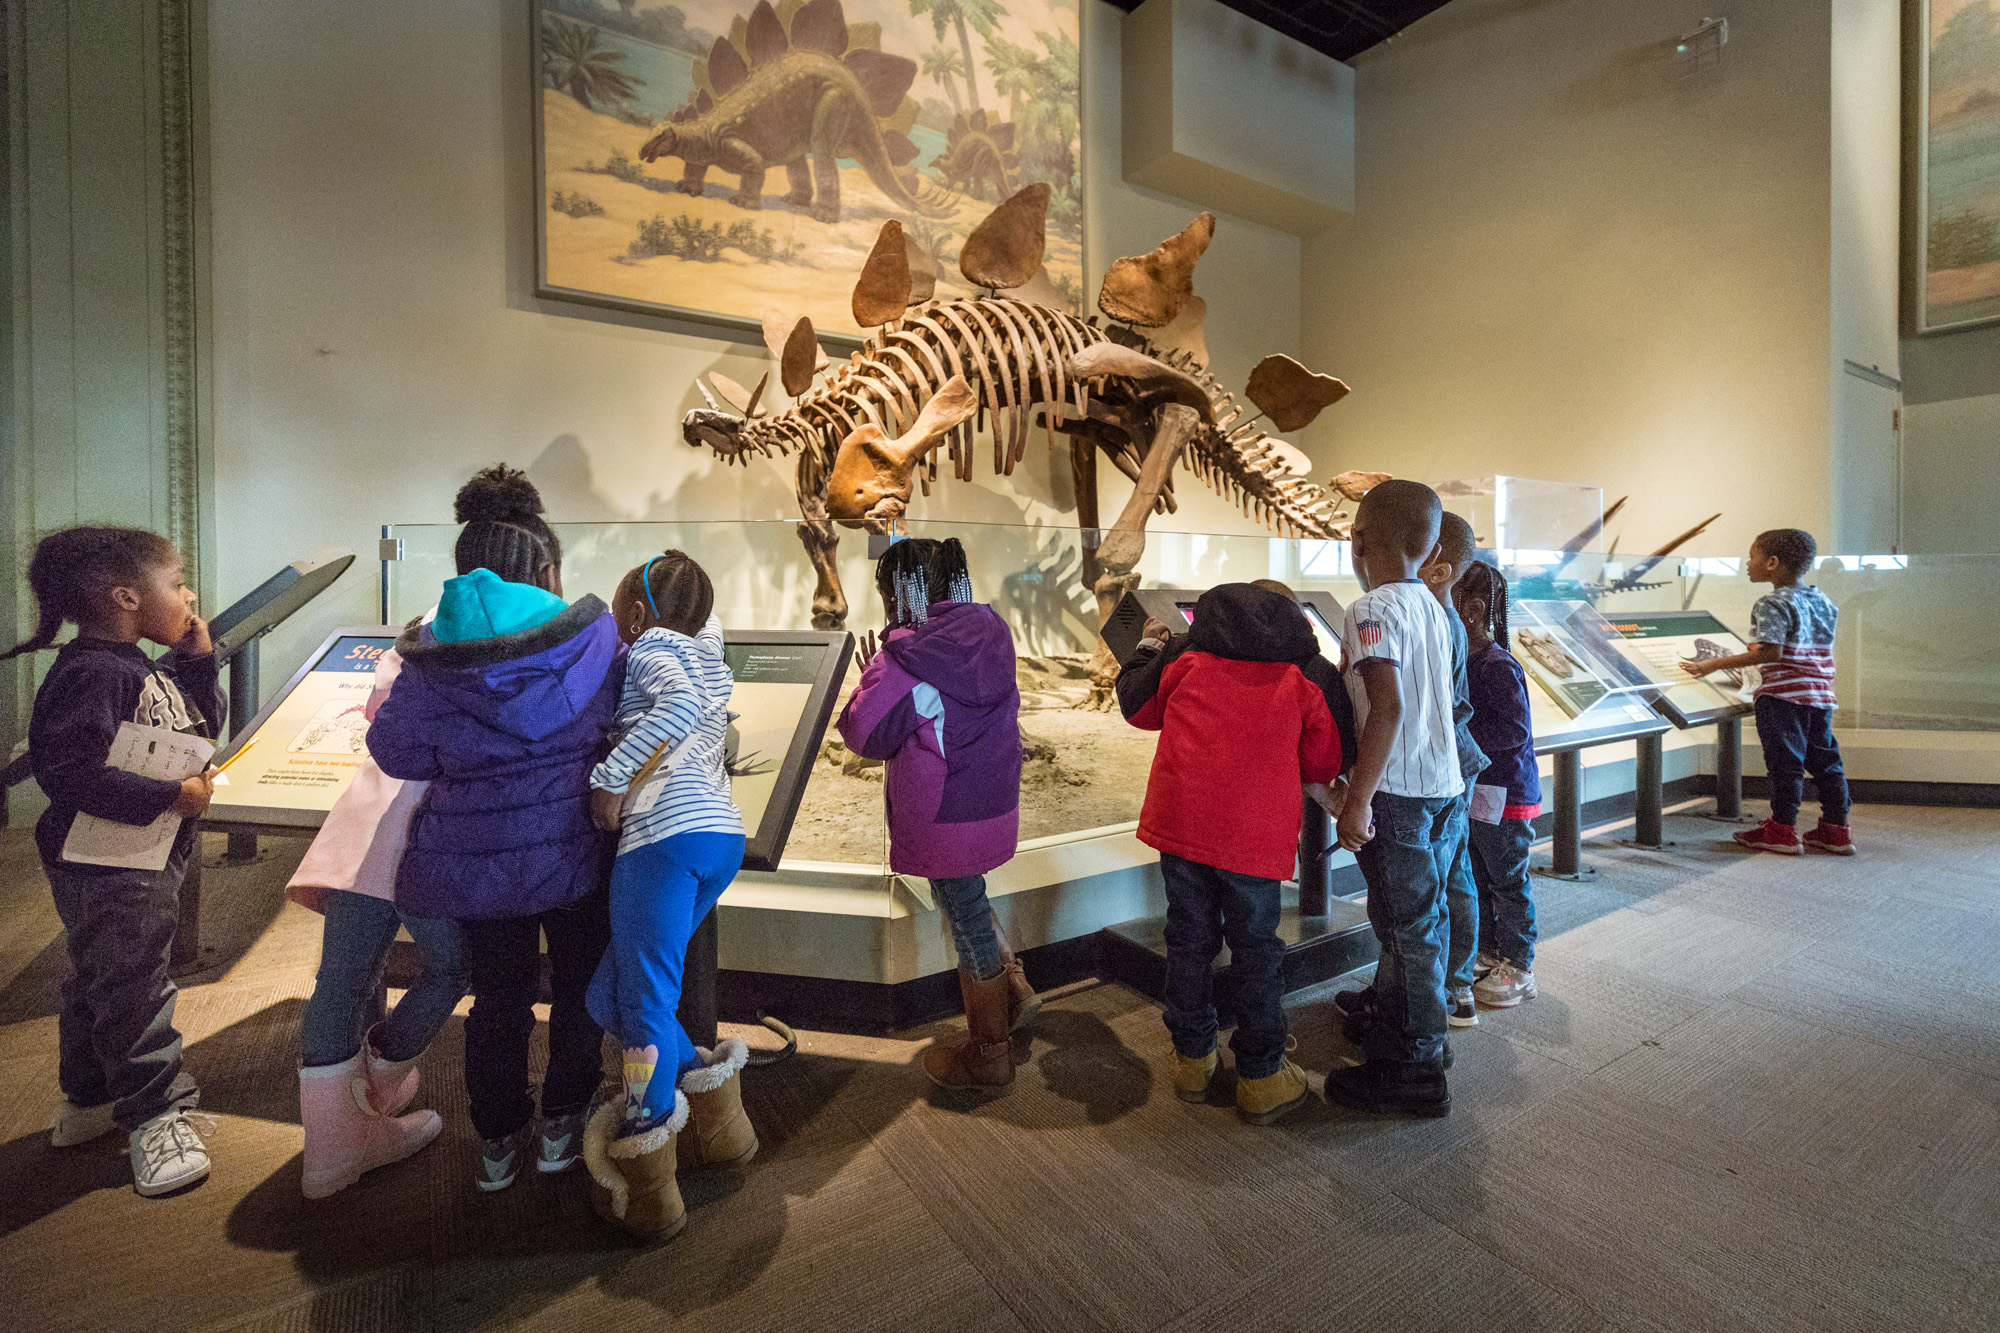 A group of young students gather around a stegosaurus fossil to read panels and look closely at the specimen. A mural of a stegosaurus hangs behind the fossil.